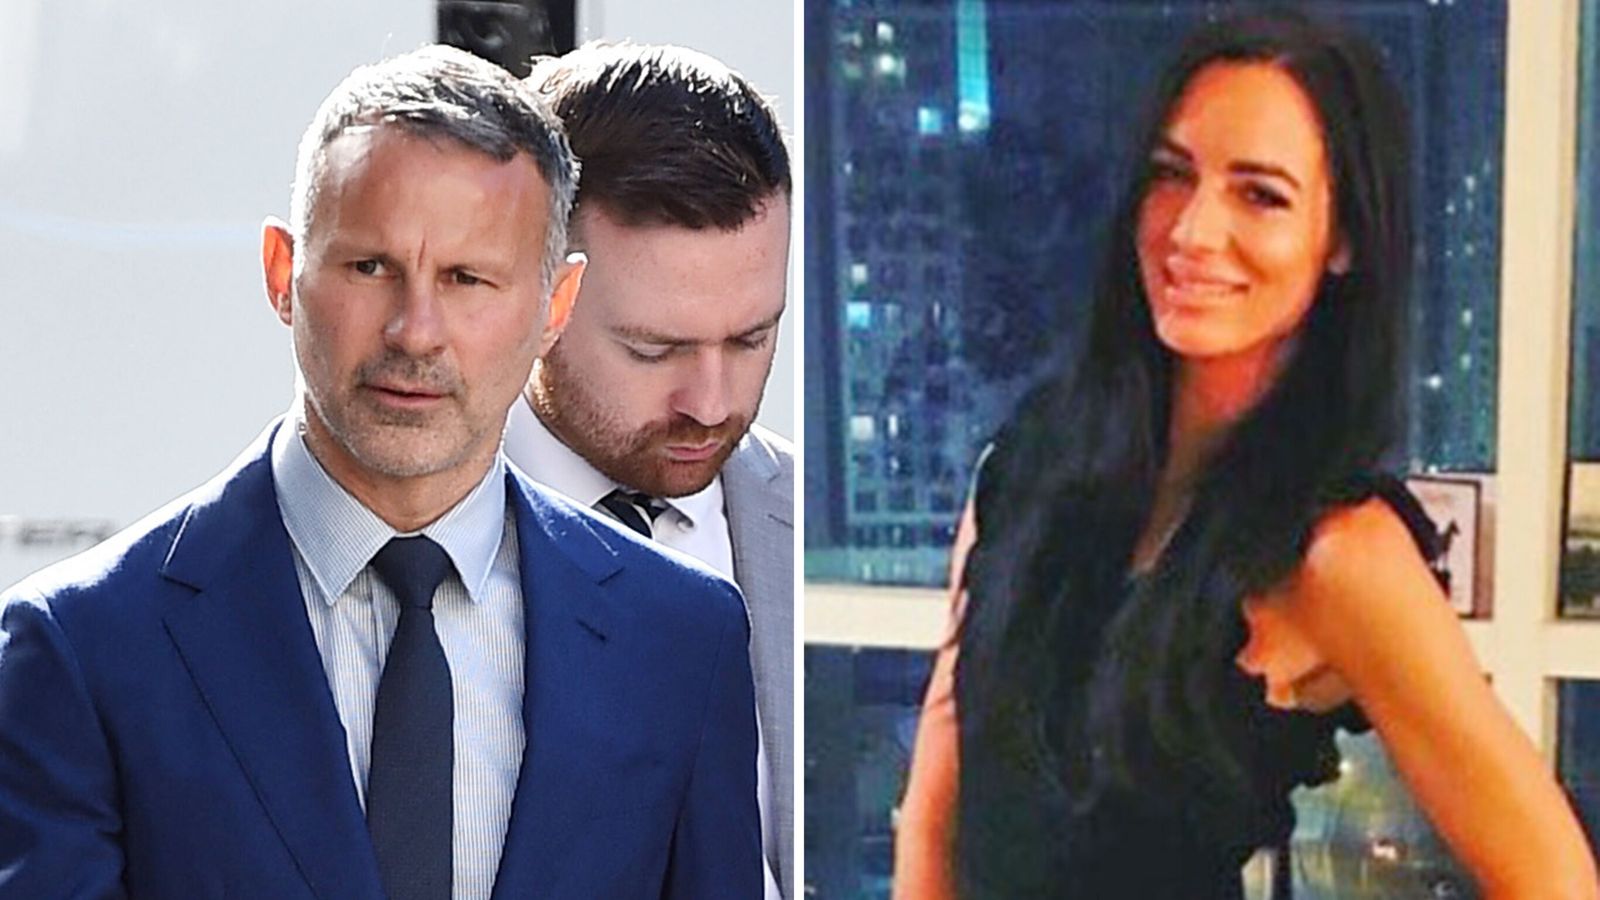 Ryan Giggs trial: Video of footballer’s arrest played to court as 999 call describes ‘blood everywhere’